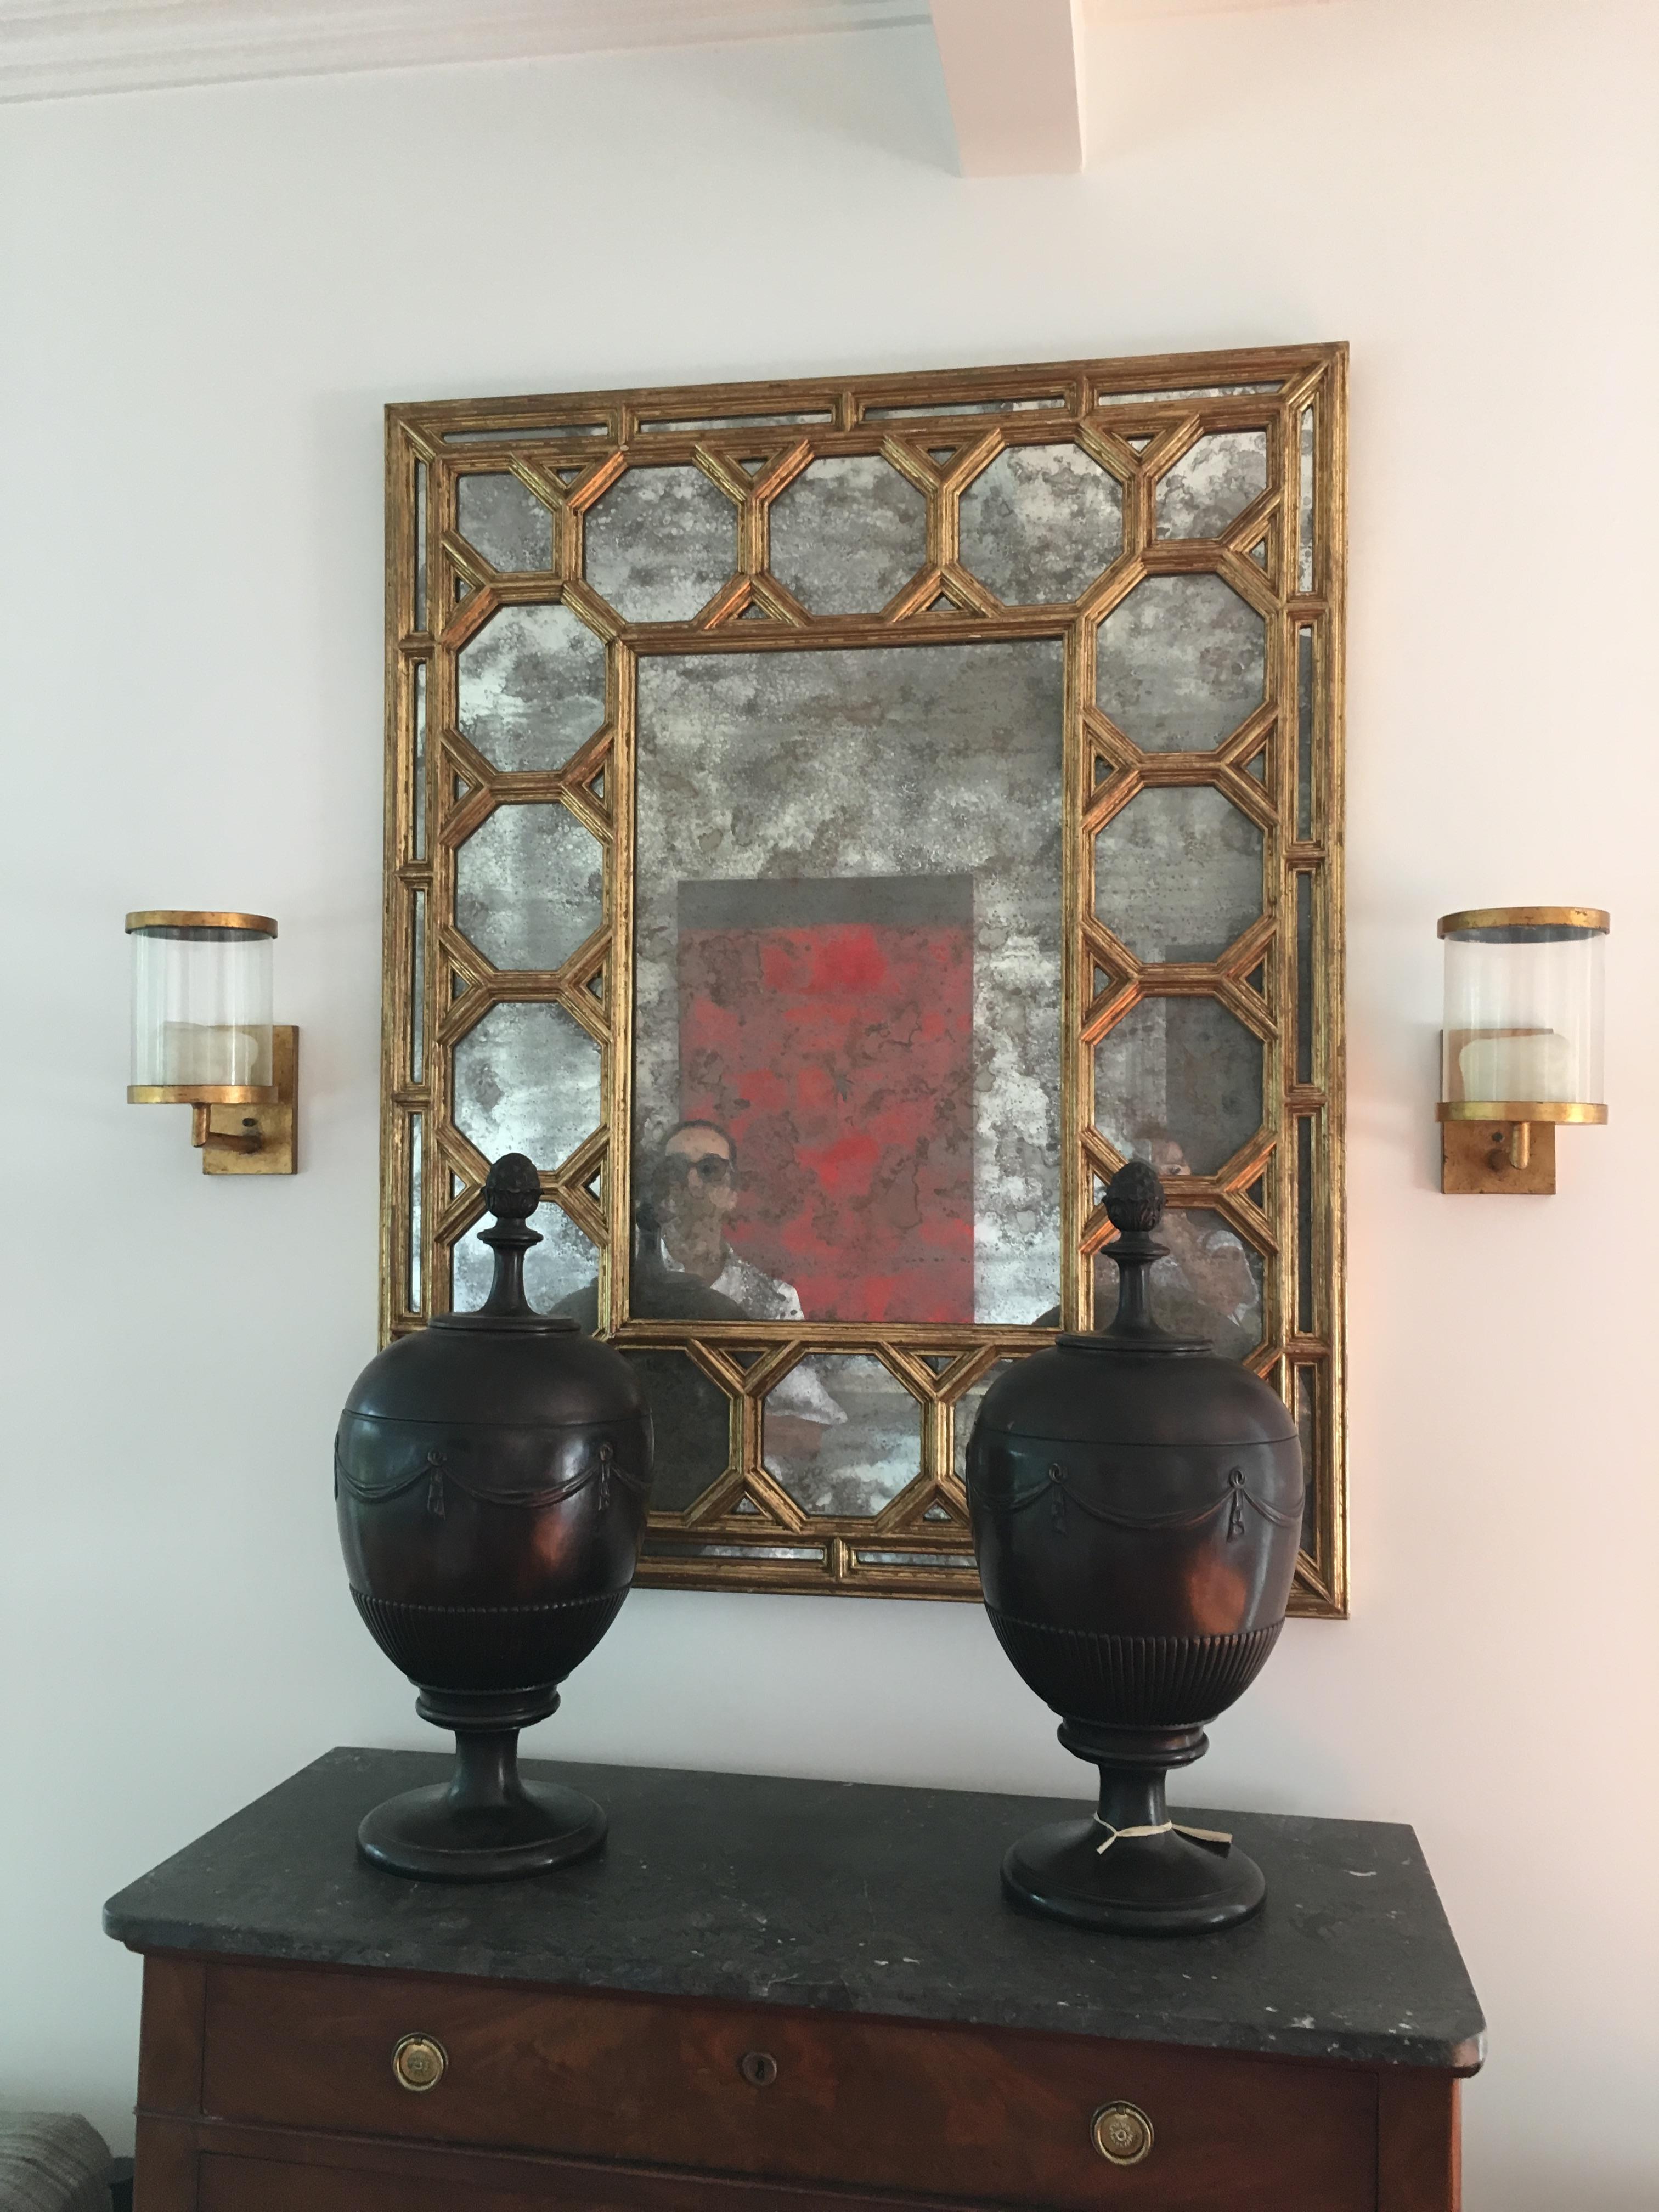 21st century gilded mirror with octagonal design with antiqued glass.

Provenance: Private estate, Southampton, NY; 
Mecox Gardens